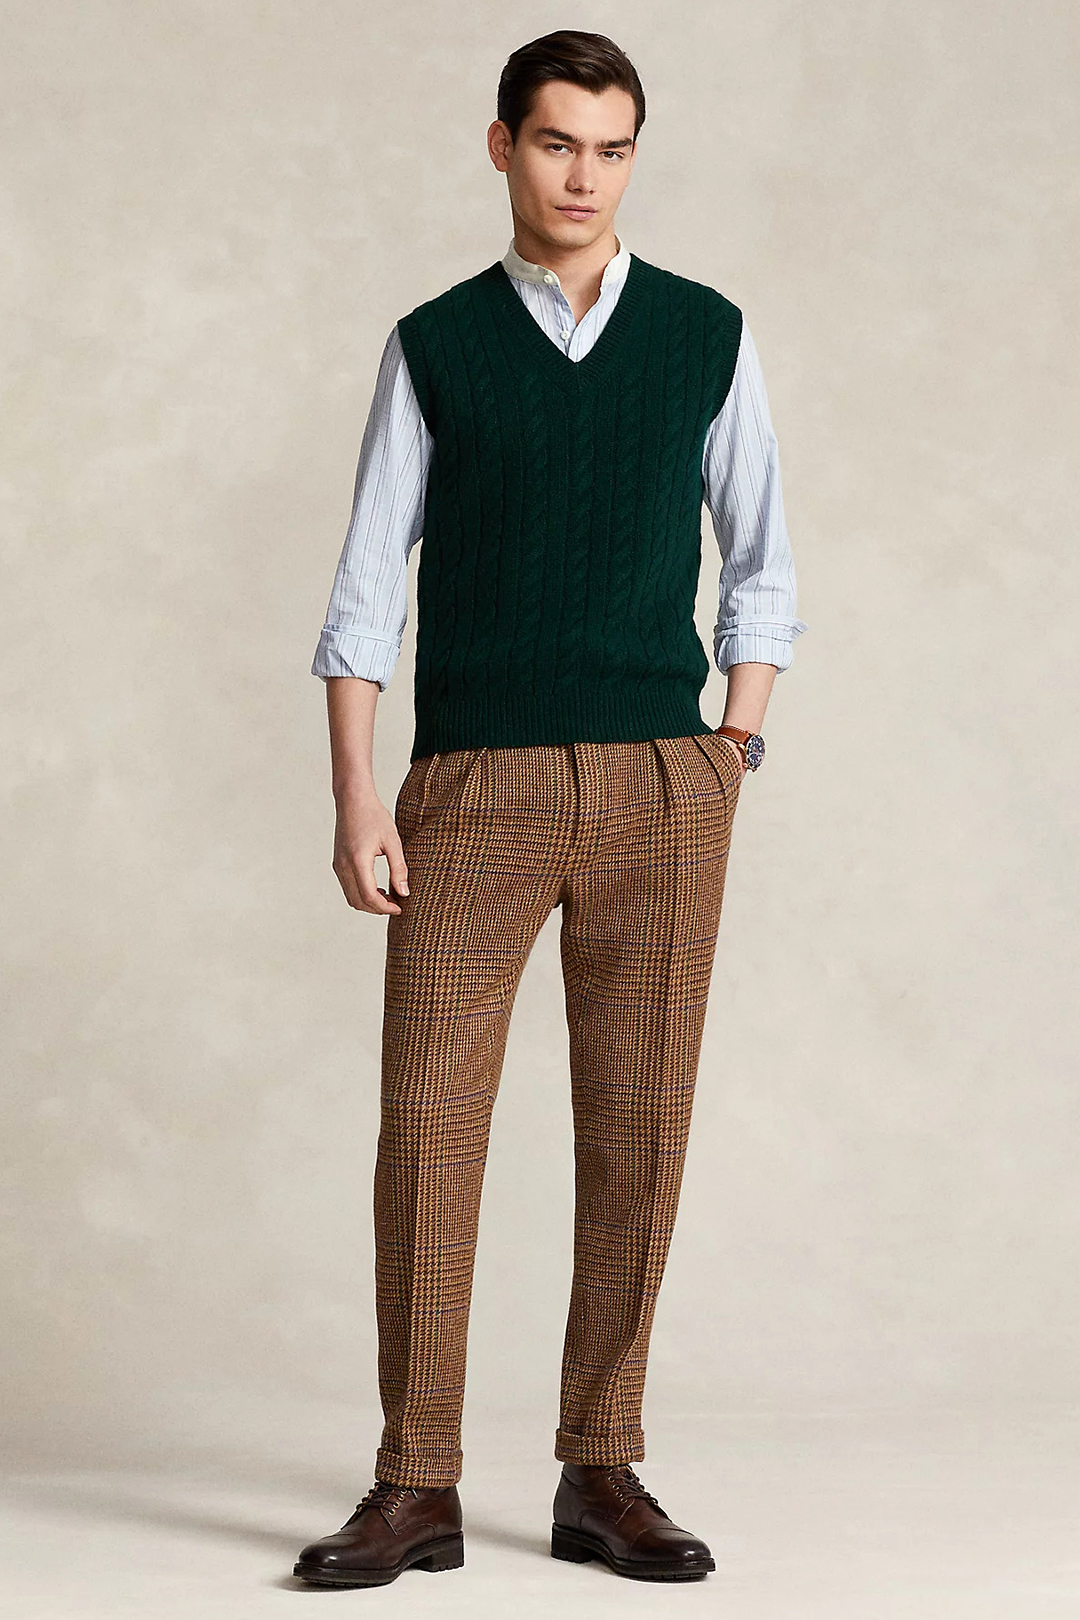 Green sweater vest, blue shirt, brown pants and dark brown dress boots outfit